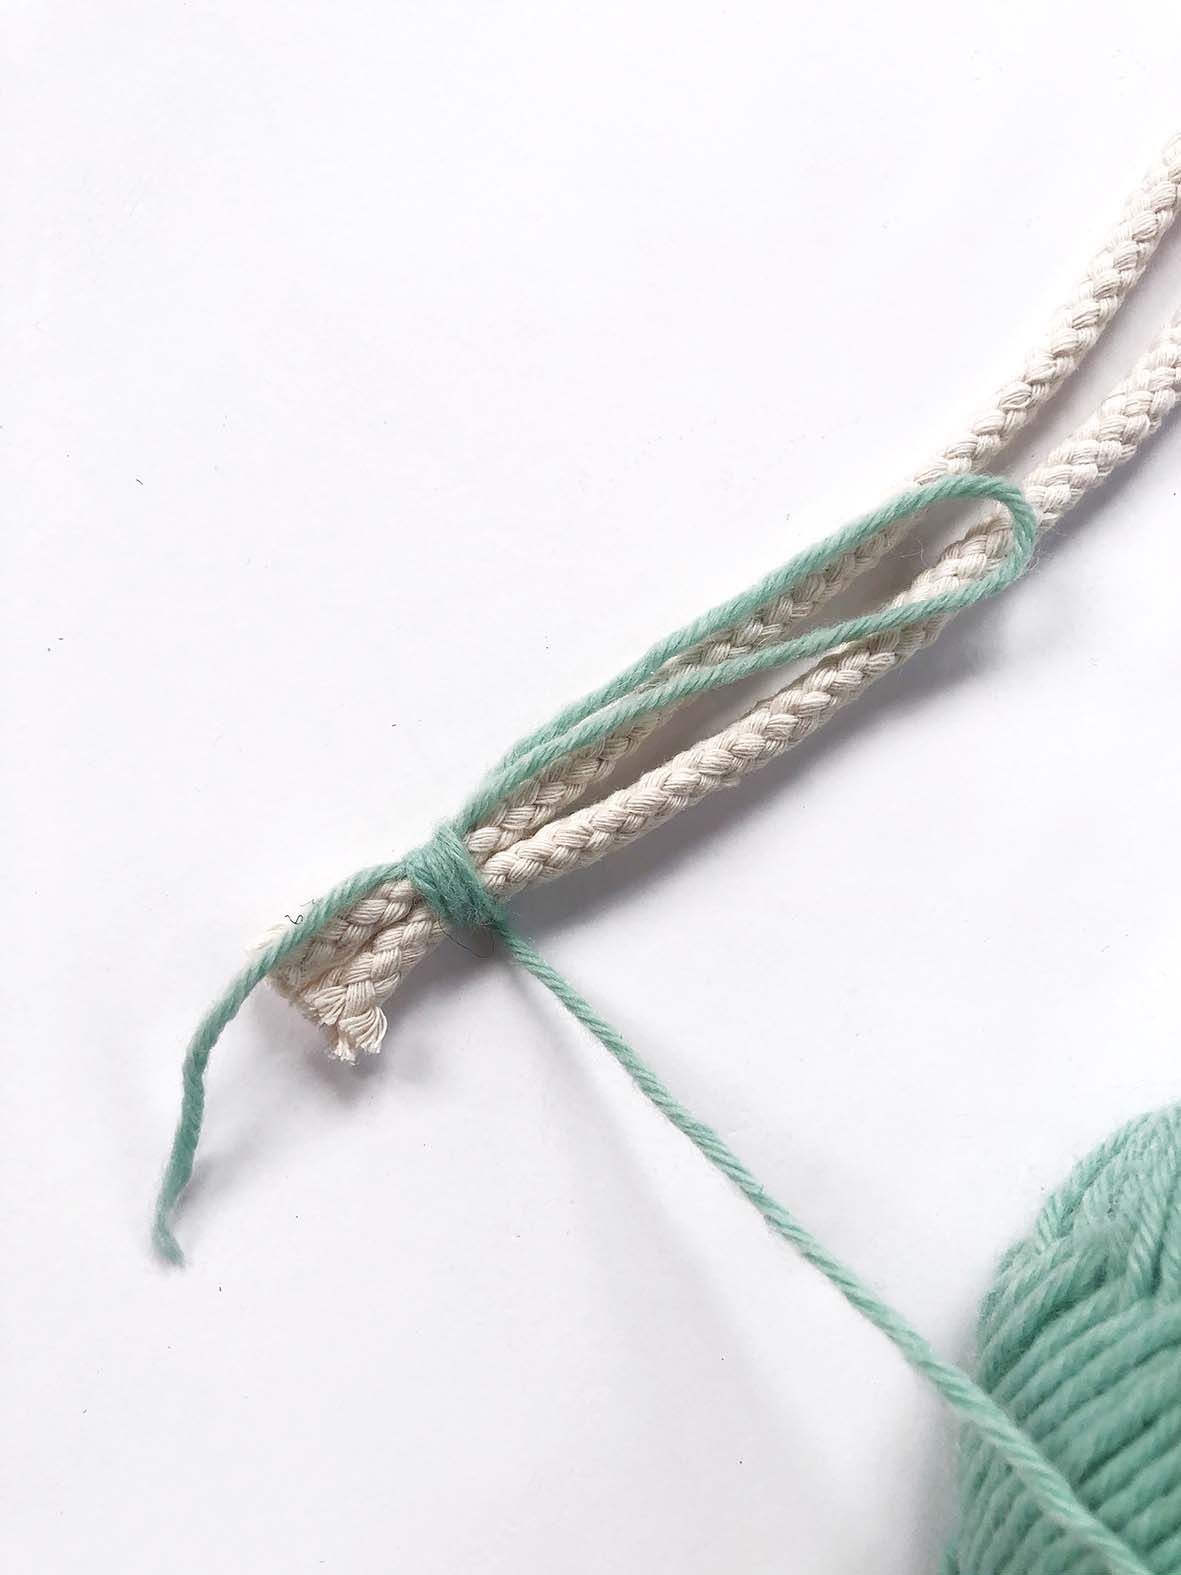 A piece of wool tying two cords together